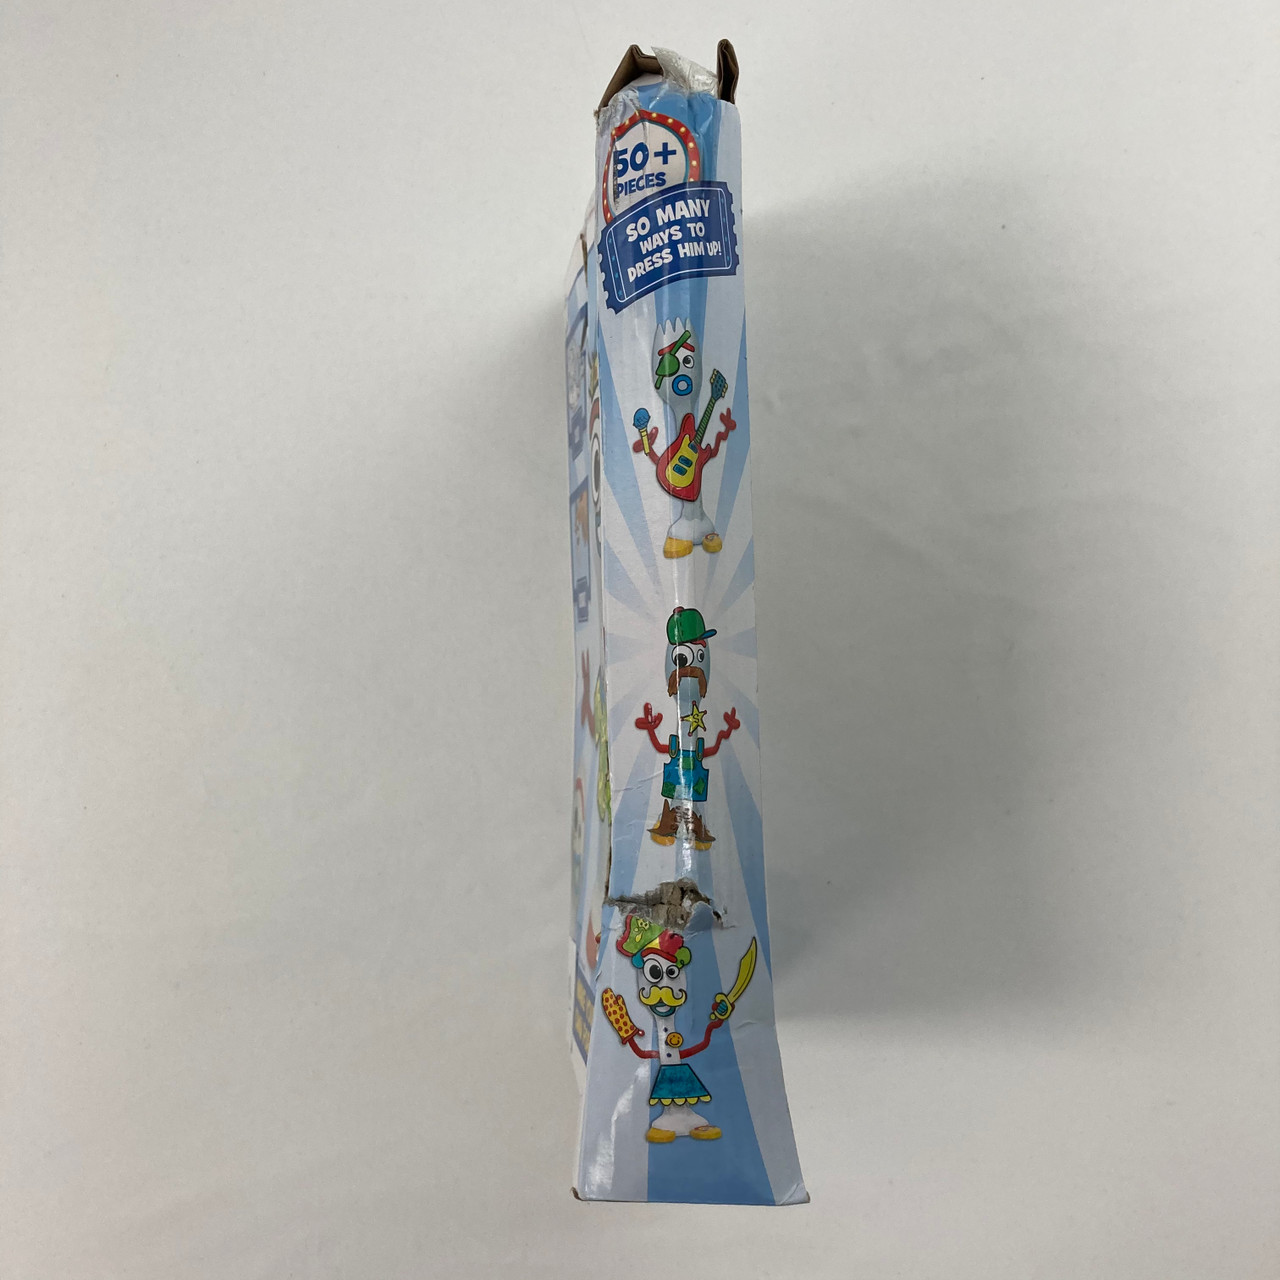 Make Your Own Forky A